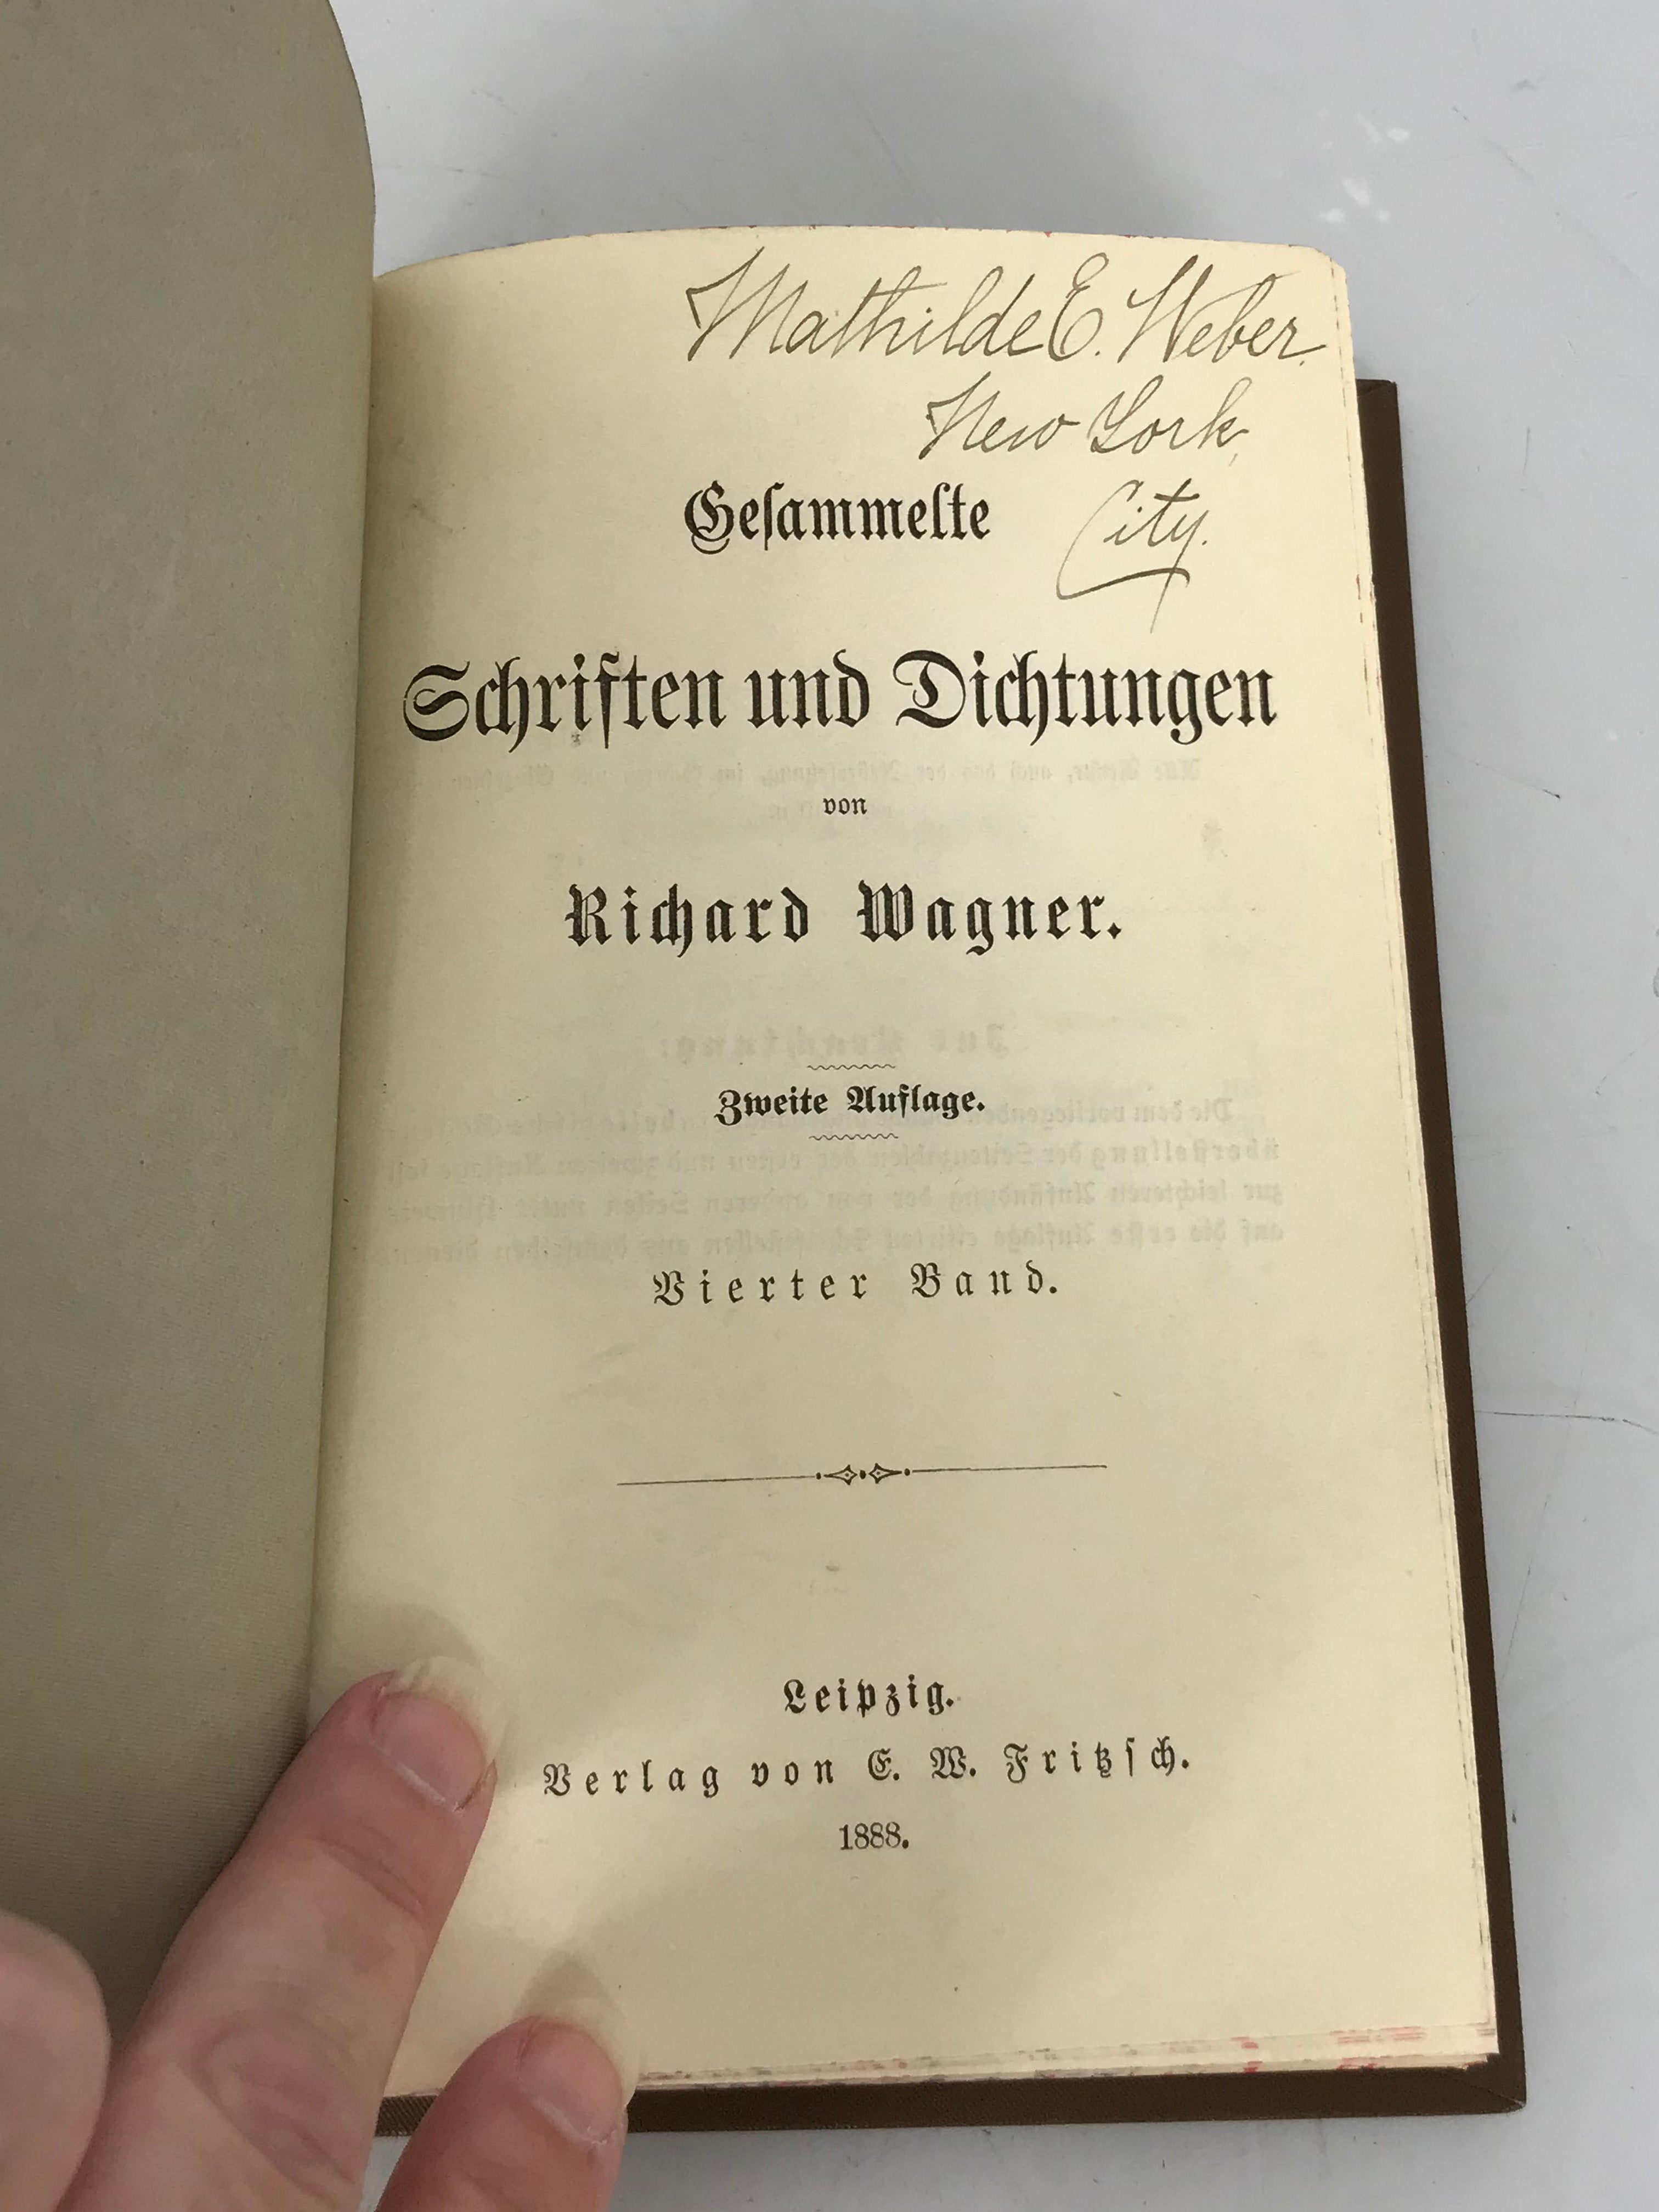 Lot of 5 Richard Wagner's Gesammelte Schriften und Dichtungen (Collected Writings and Poetry) in German 1888 HC